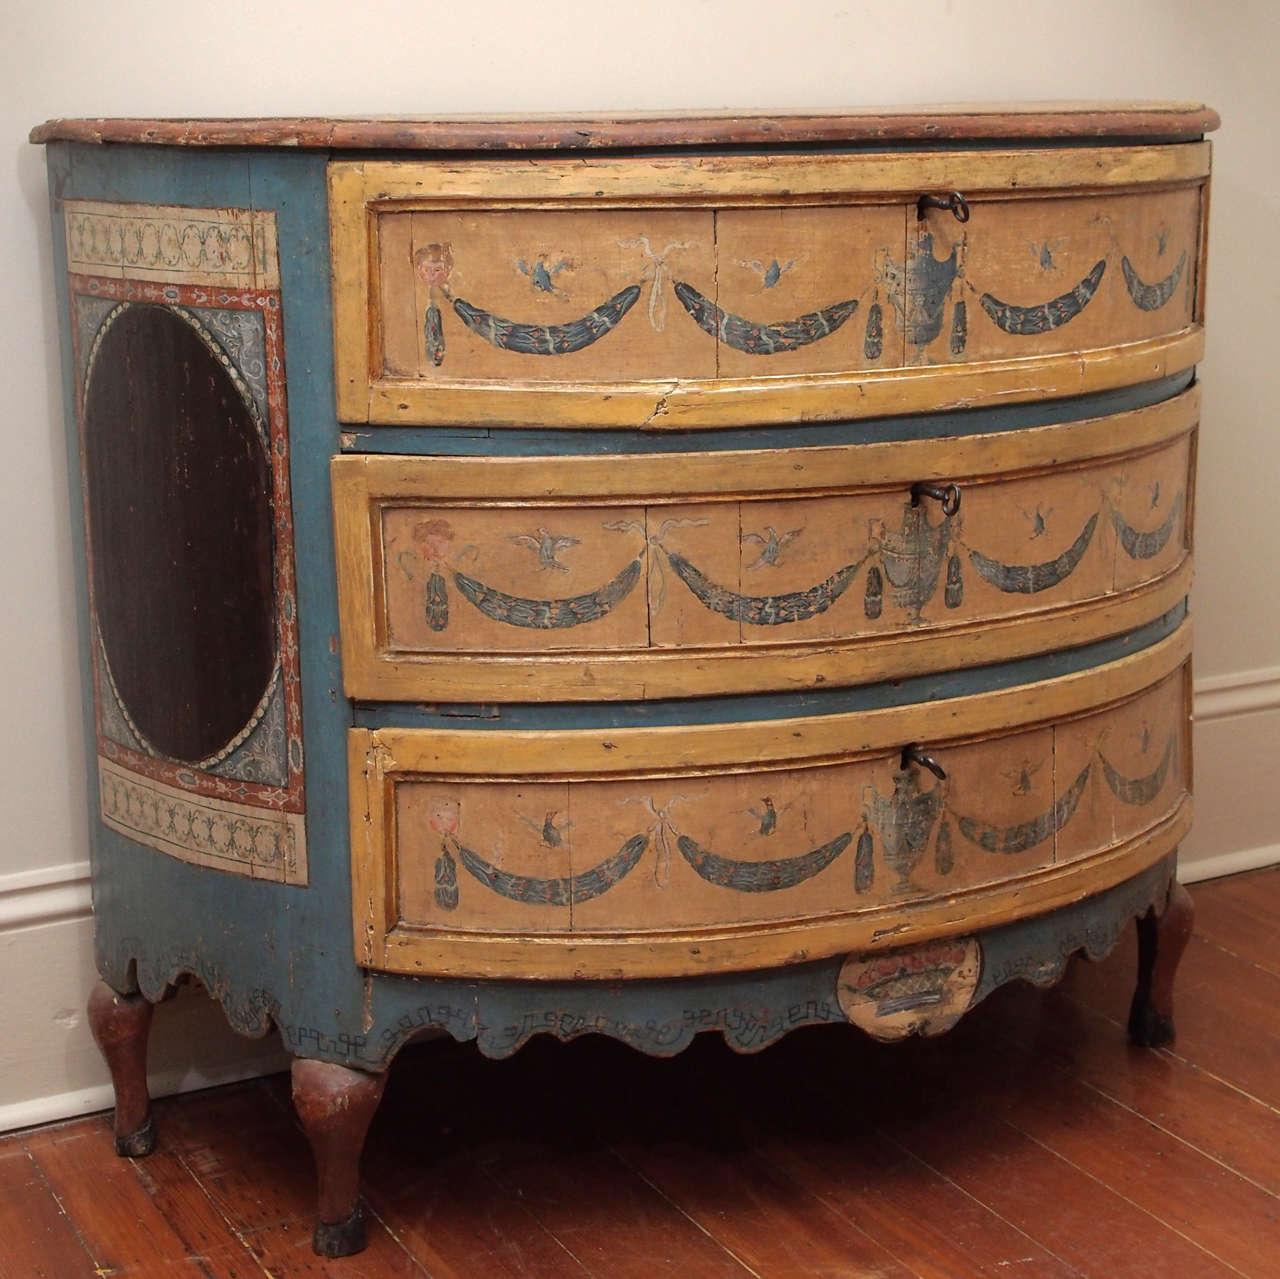 A very special piece: a rare Italian polychrome commode, in demilune shape, having three drawers over a scalloped apron and on cabriole legs.  The drawers decorated with urns and garland swags suspended by ribbons and faces and punctuated with